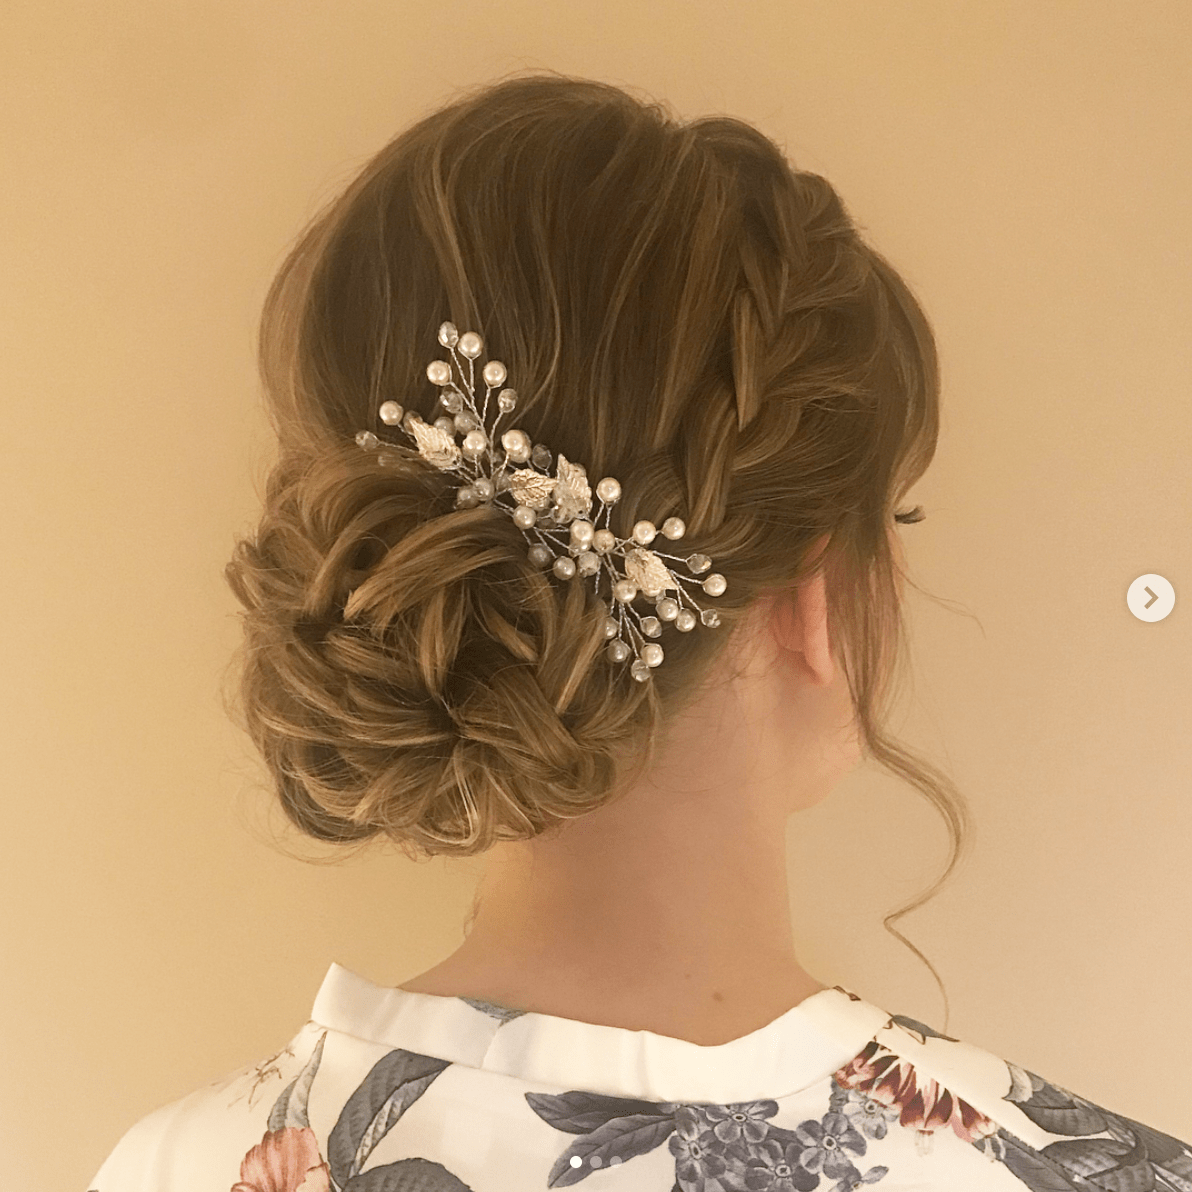 Bridal Hair Accessories We Swoon Over